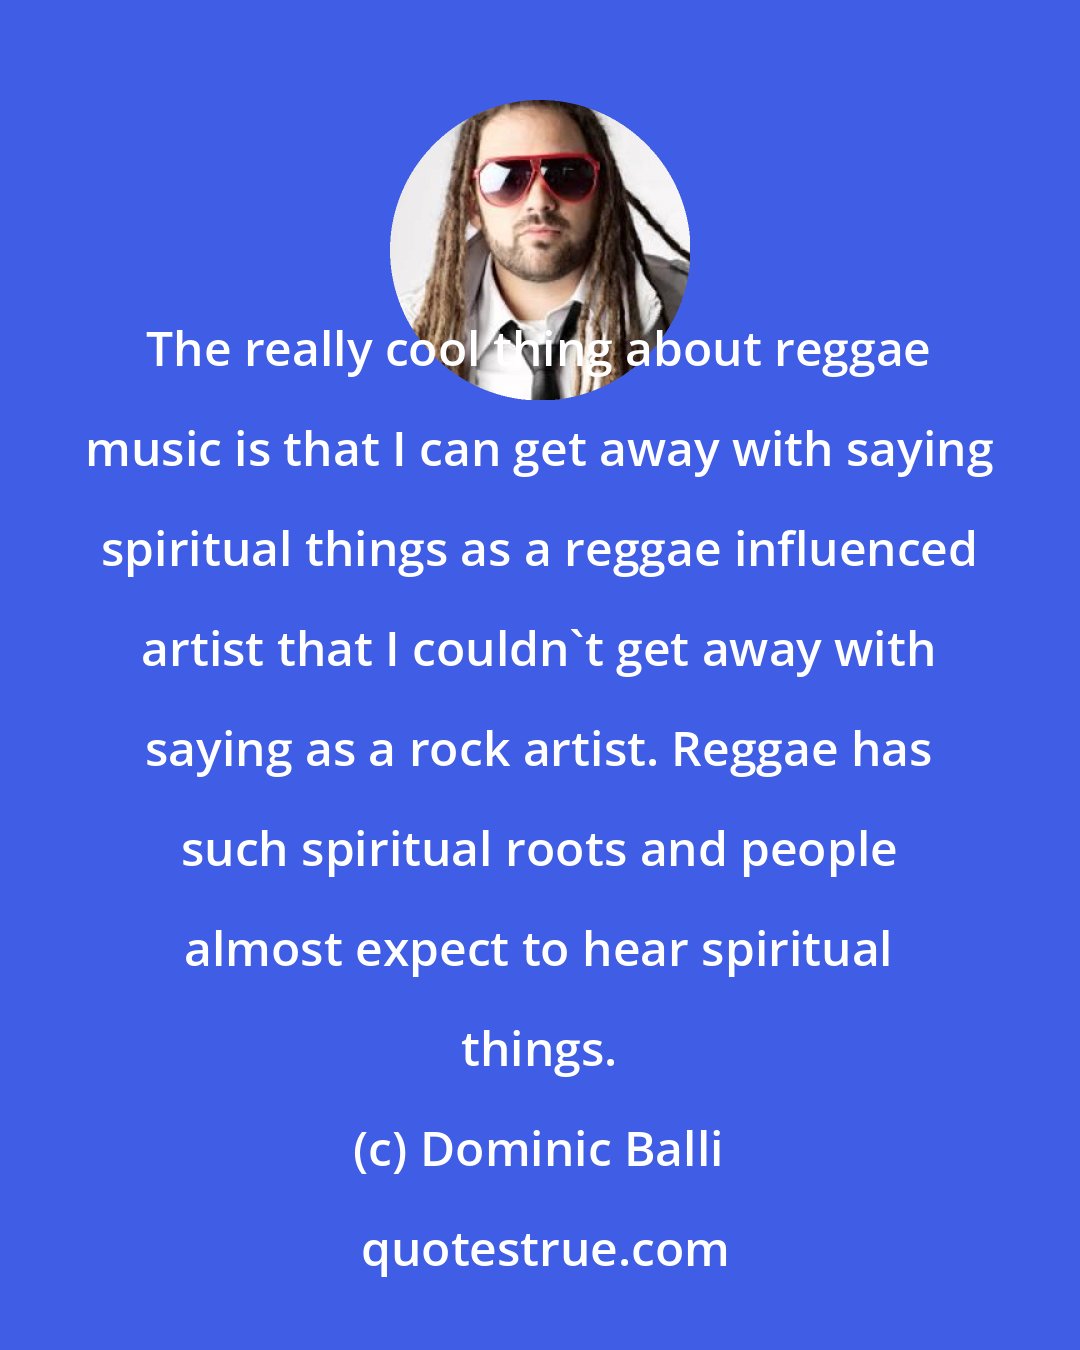 Dominic Balli: The really cool thing about reggae music is that I can get away with saying spiritual things as a reggae influenced artist that I couldn't get away with saying as a rock artist. Reggae has such spiritual roots and people almost expect to hear spiritual things.